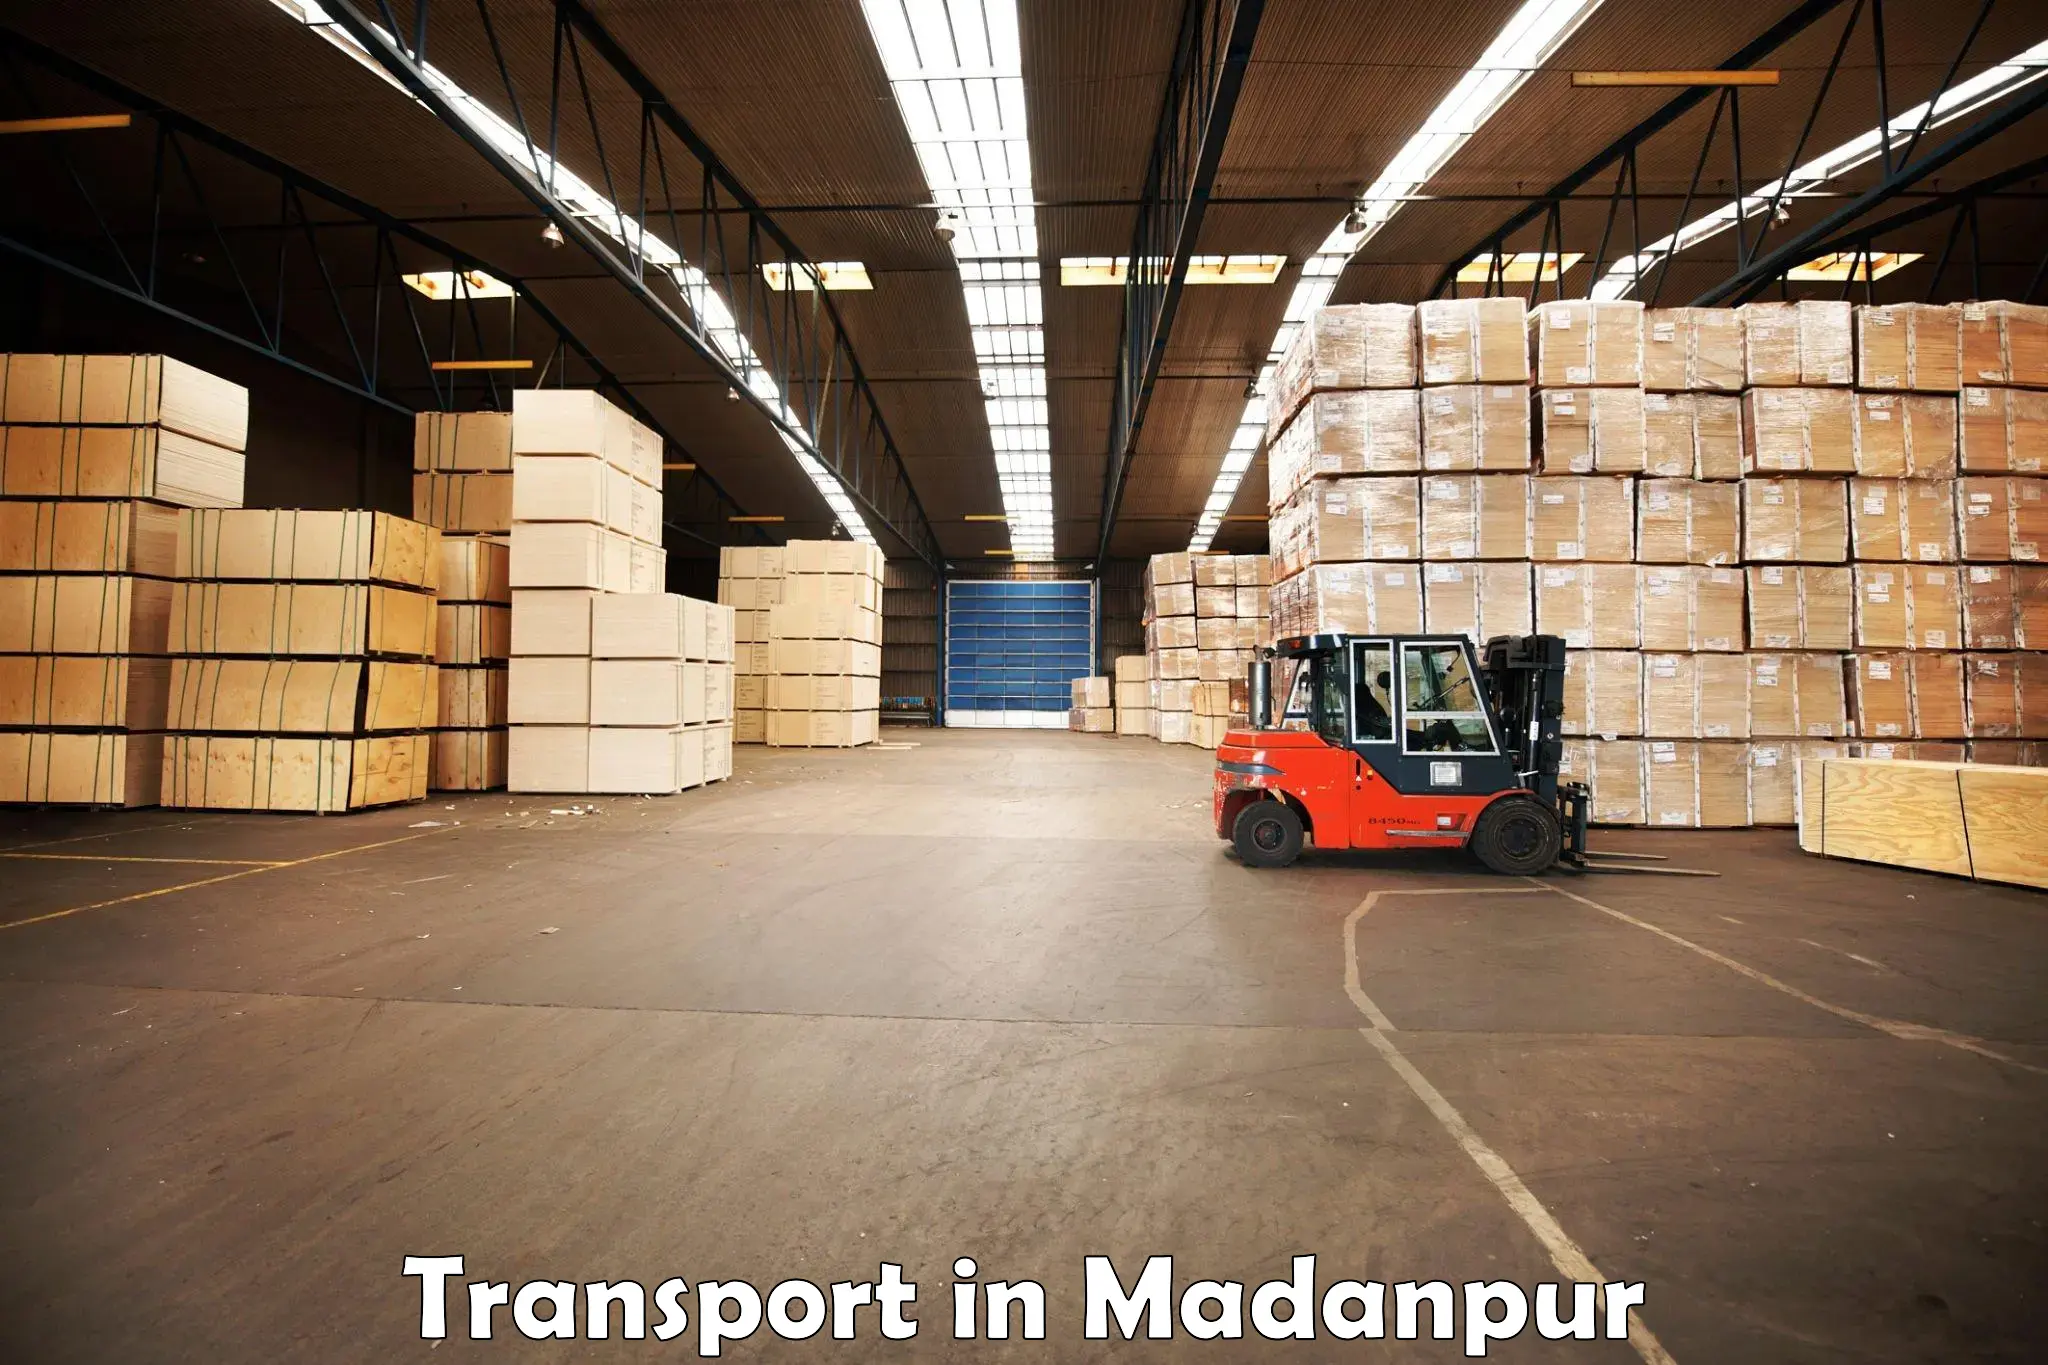 Daily parcel service transport in Madanpur